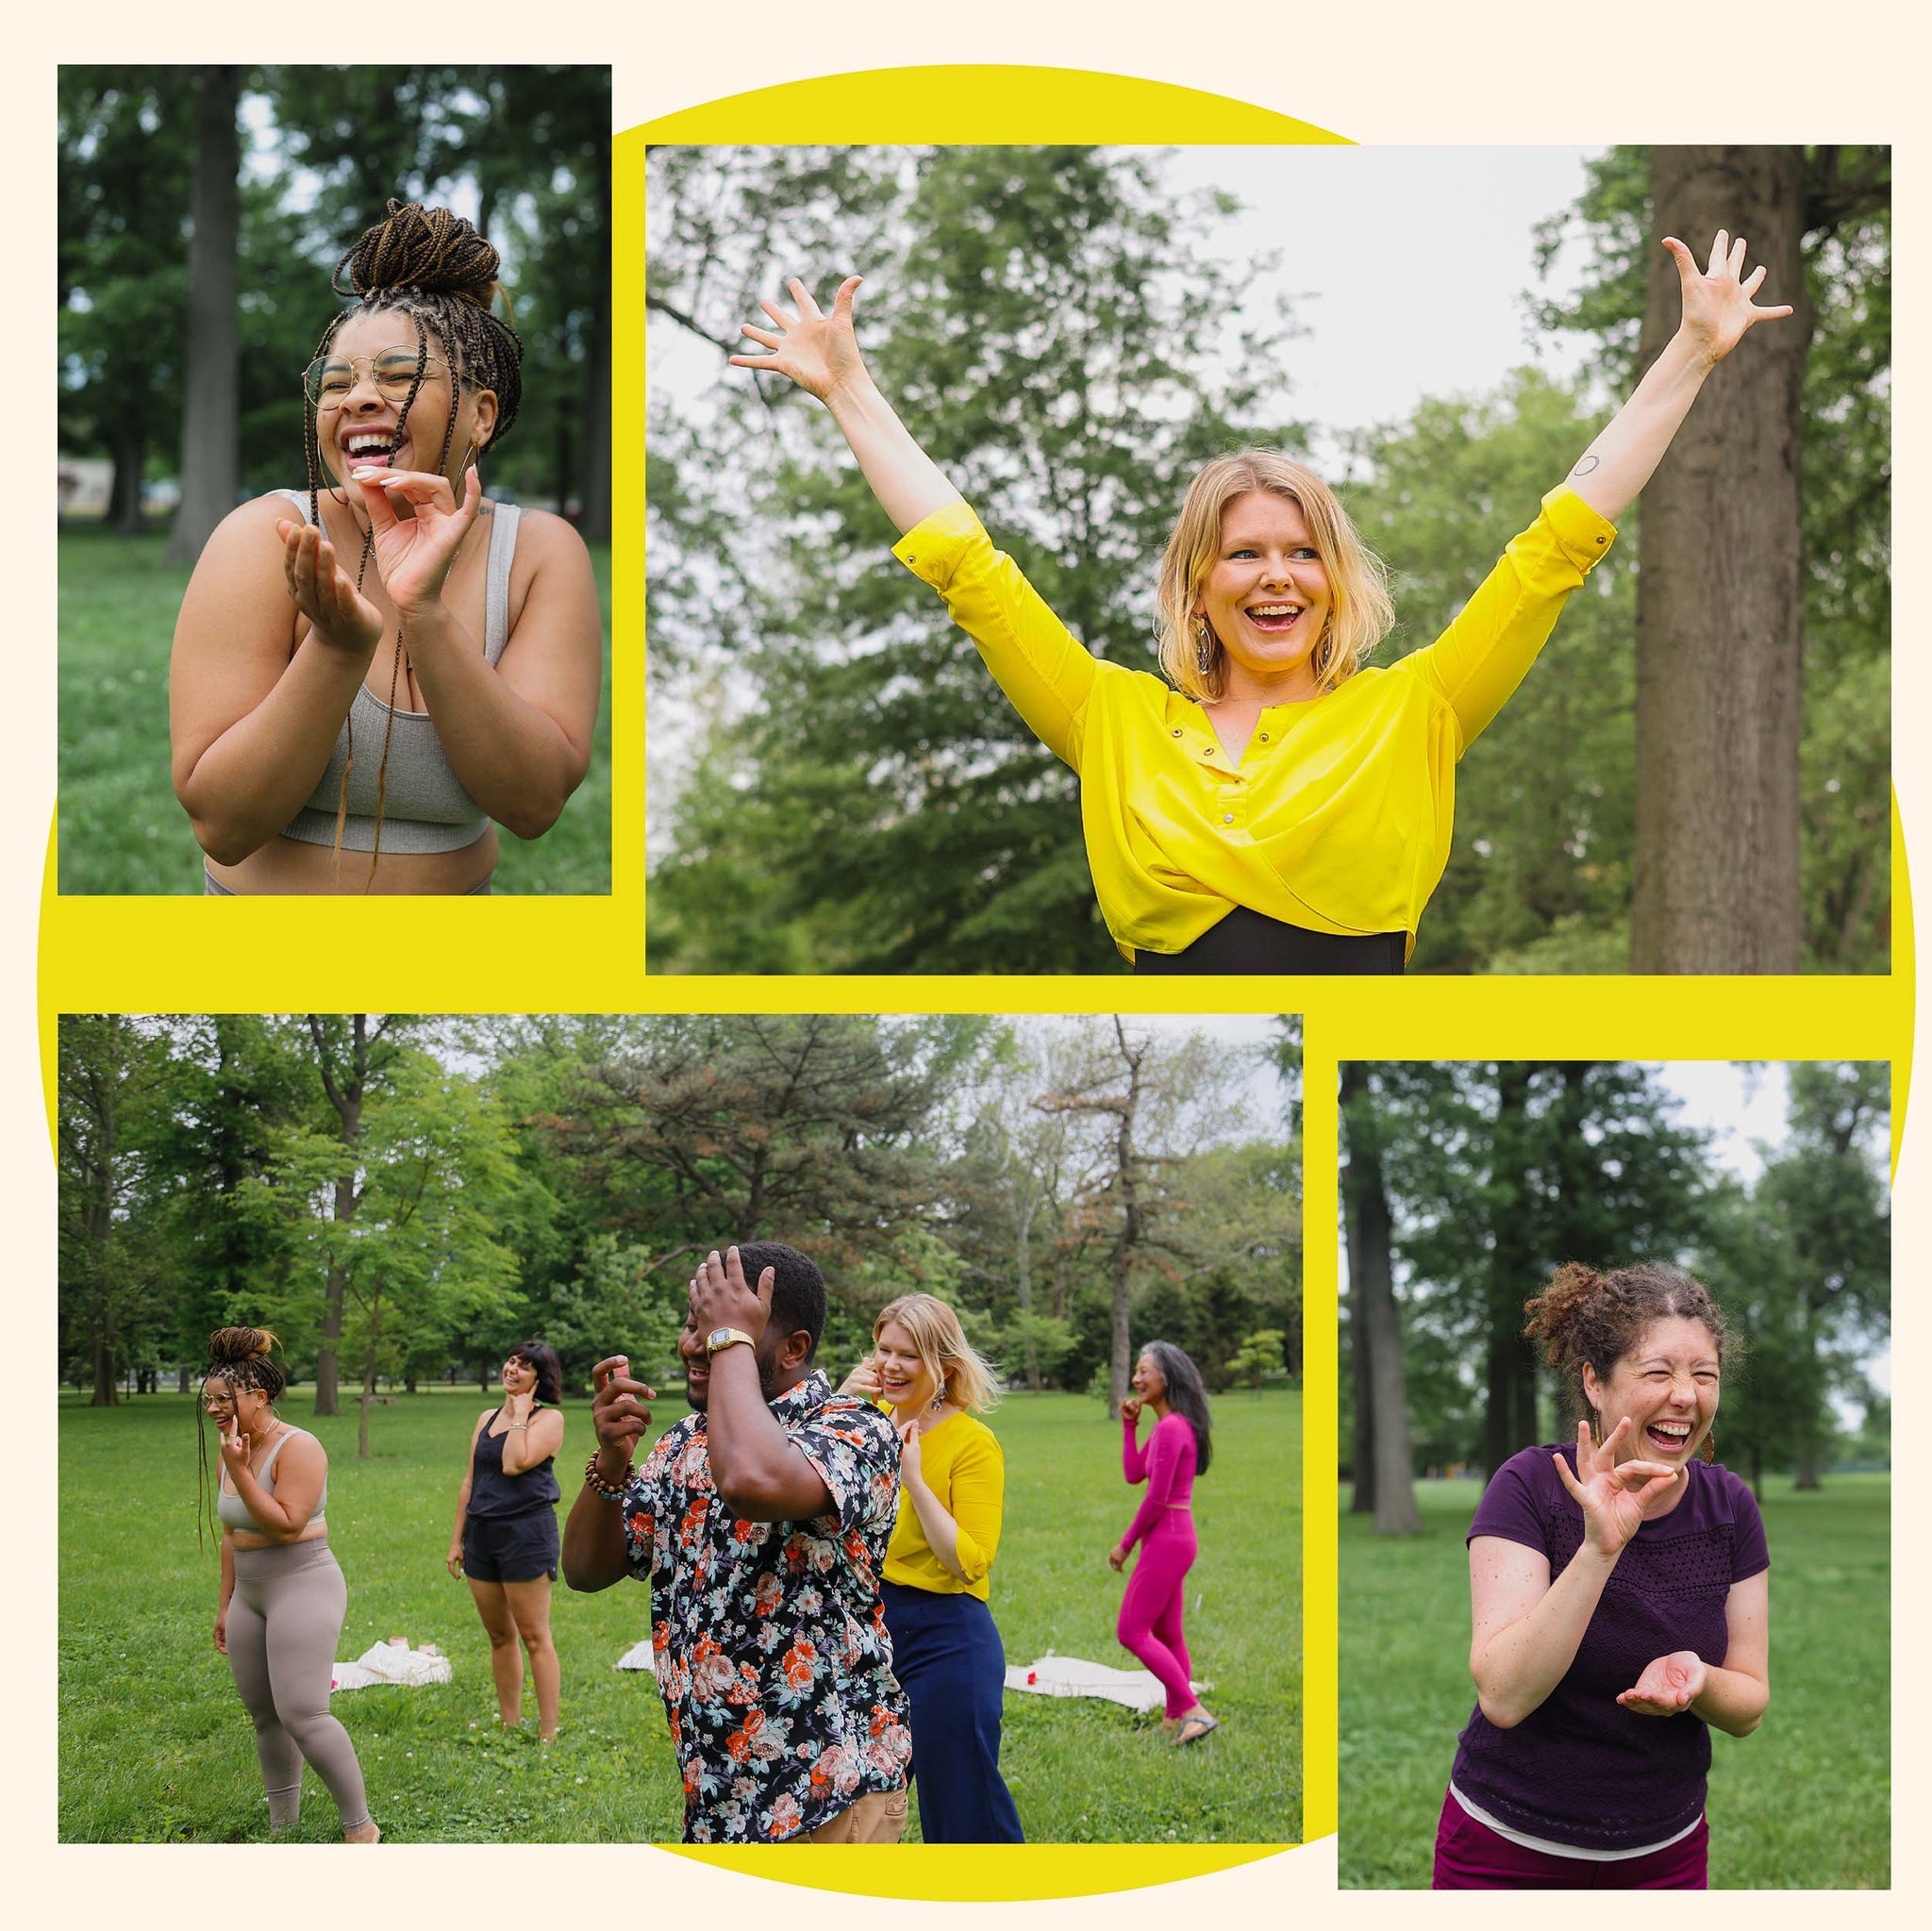 Image of people standing and smiles on their faces doing laughing yoga.